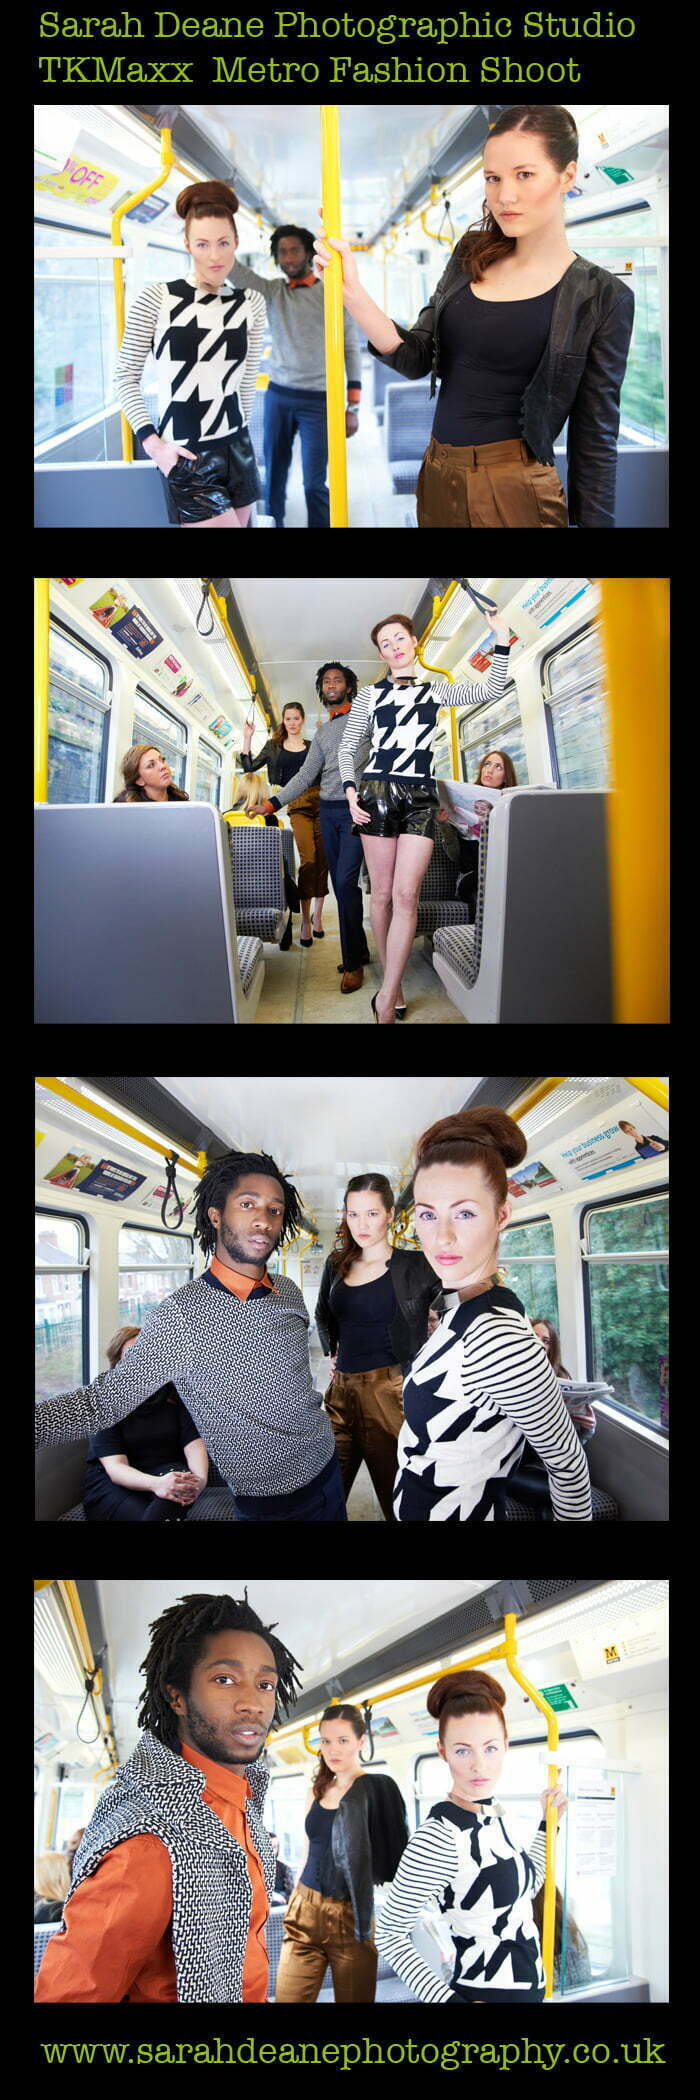 TKMaxx Fashion shoot to promote the new store opening in newcastle on a moving metro carriage